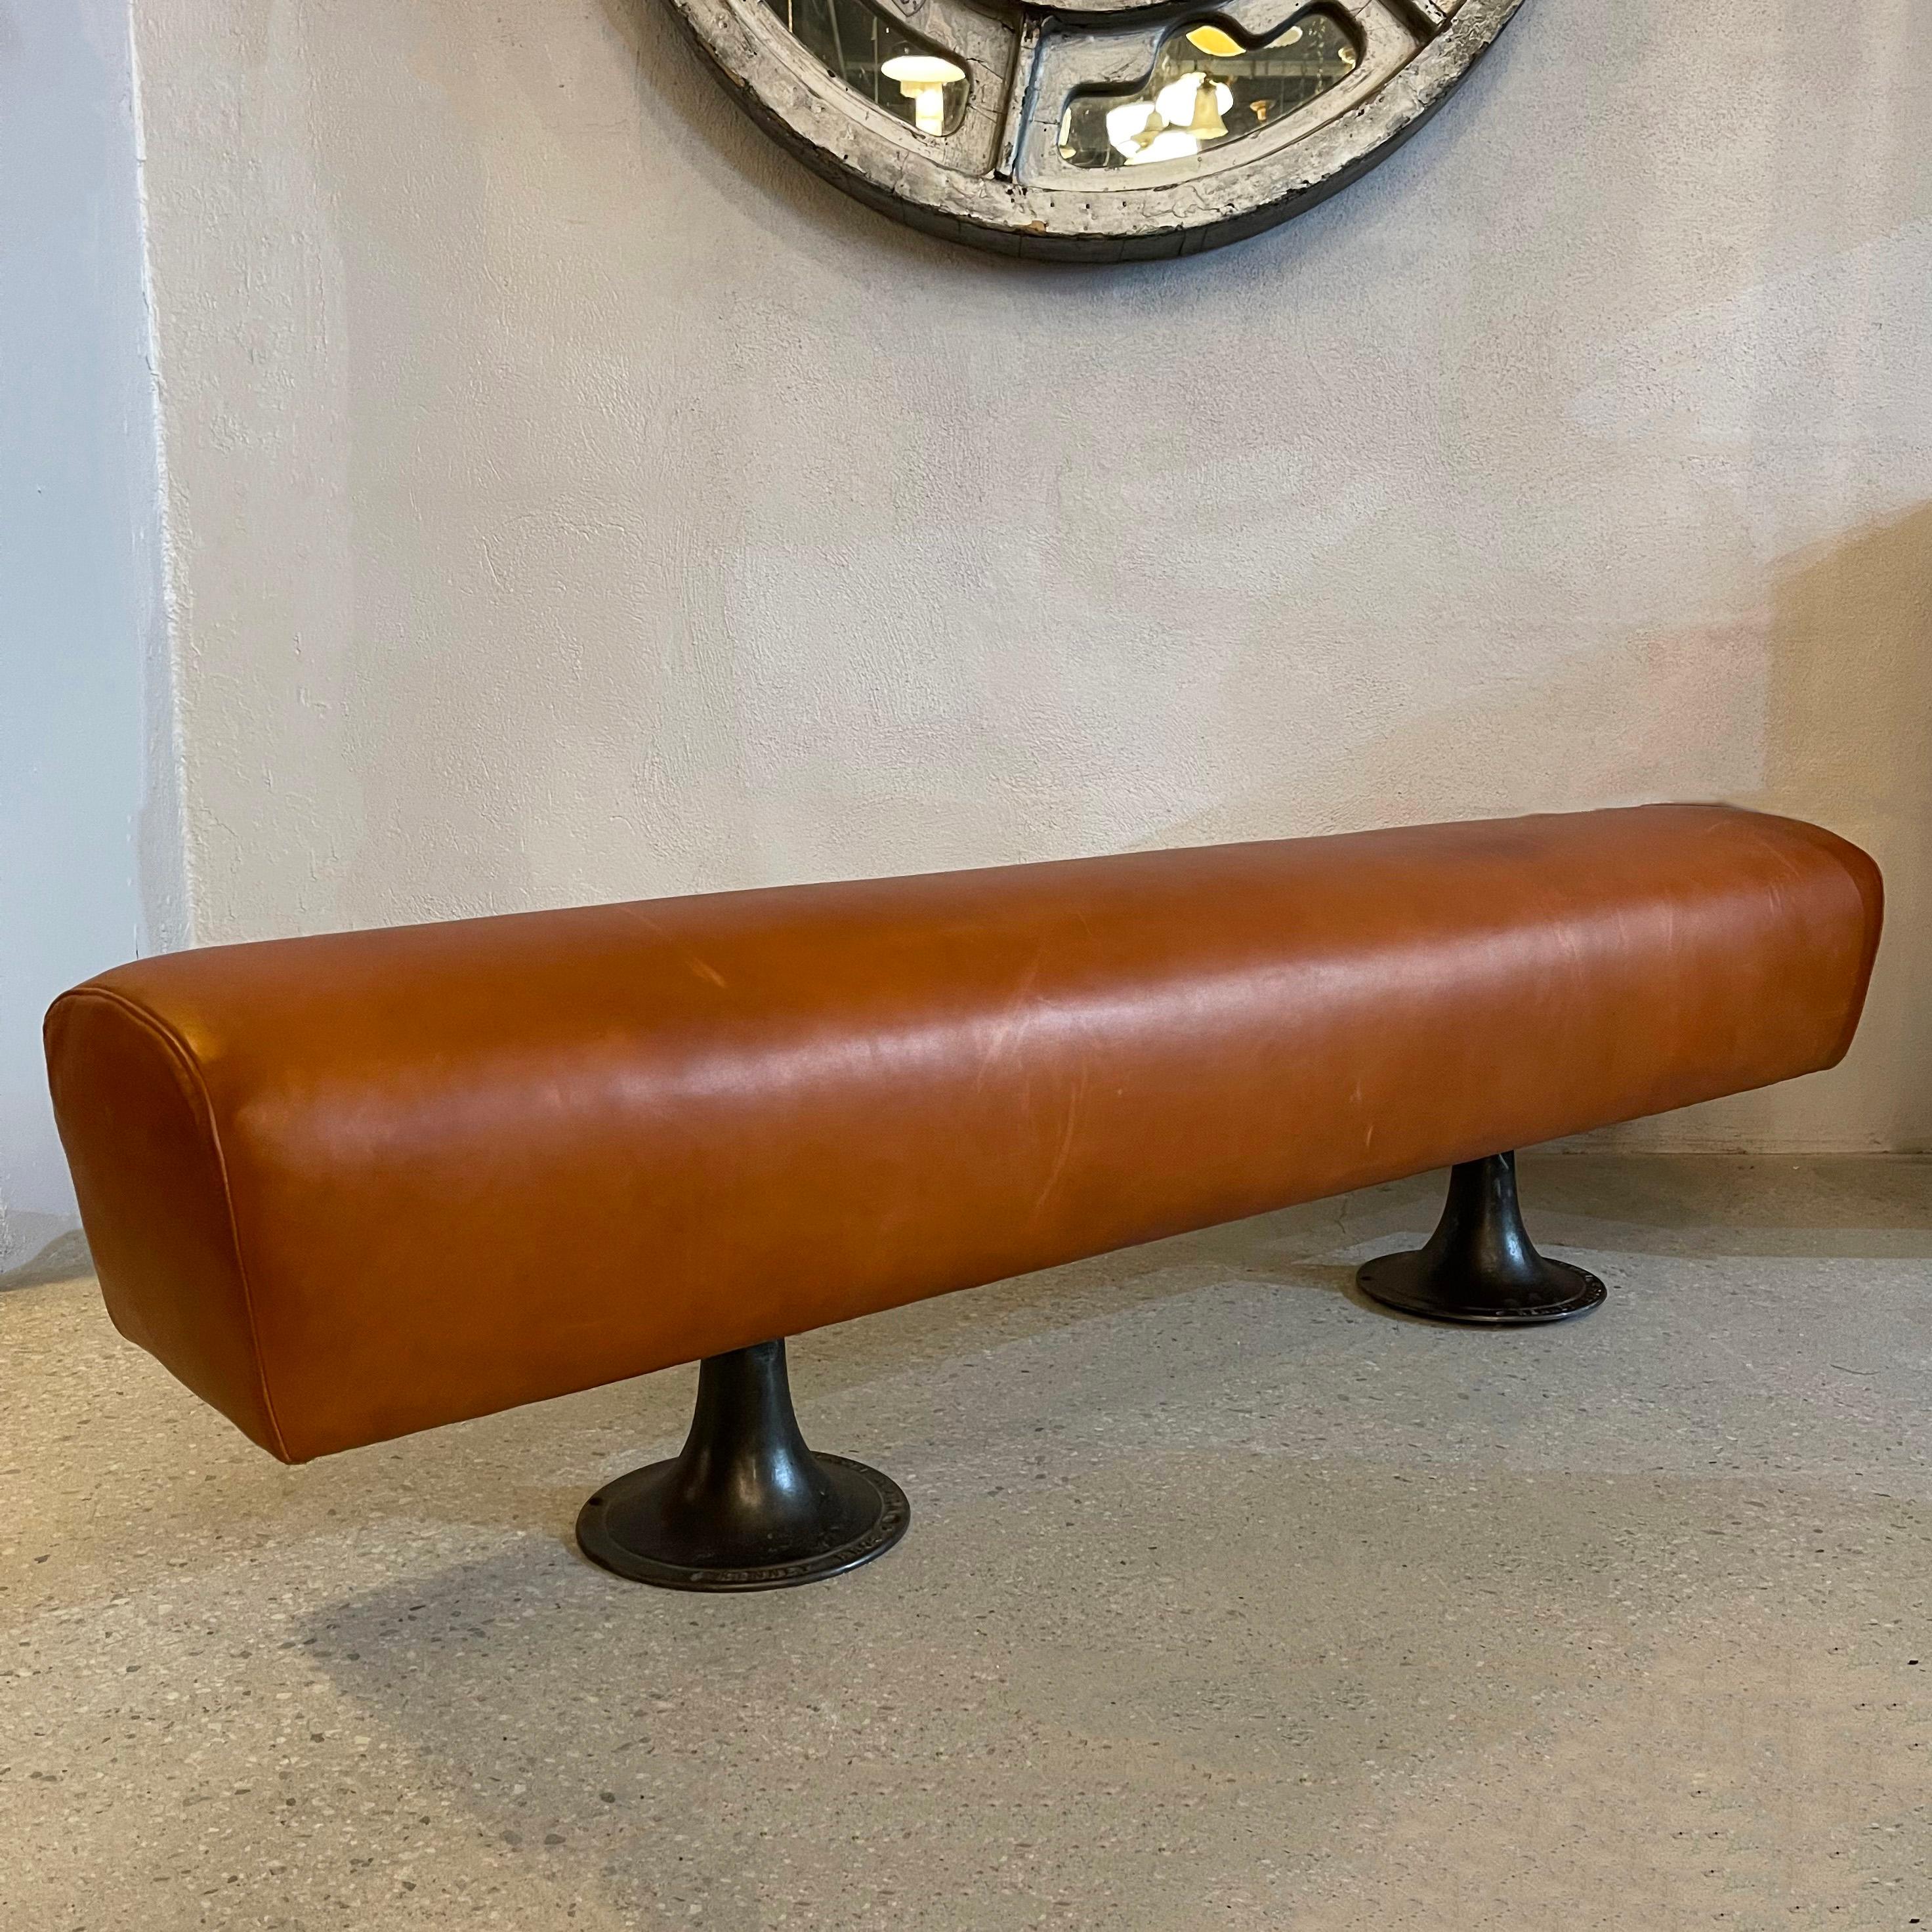 Custom, industrial, pommel horse bench features a 1950's pommel horse newly covered in supple, russet leather paired with antique cast iron factory pedestal legs. This one-of-a-kind bench is composed of vintage and antique components, custom